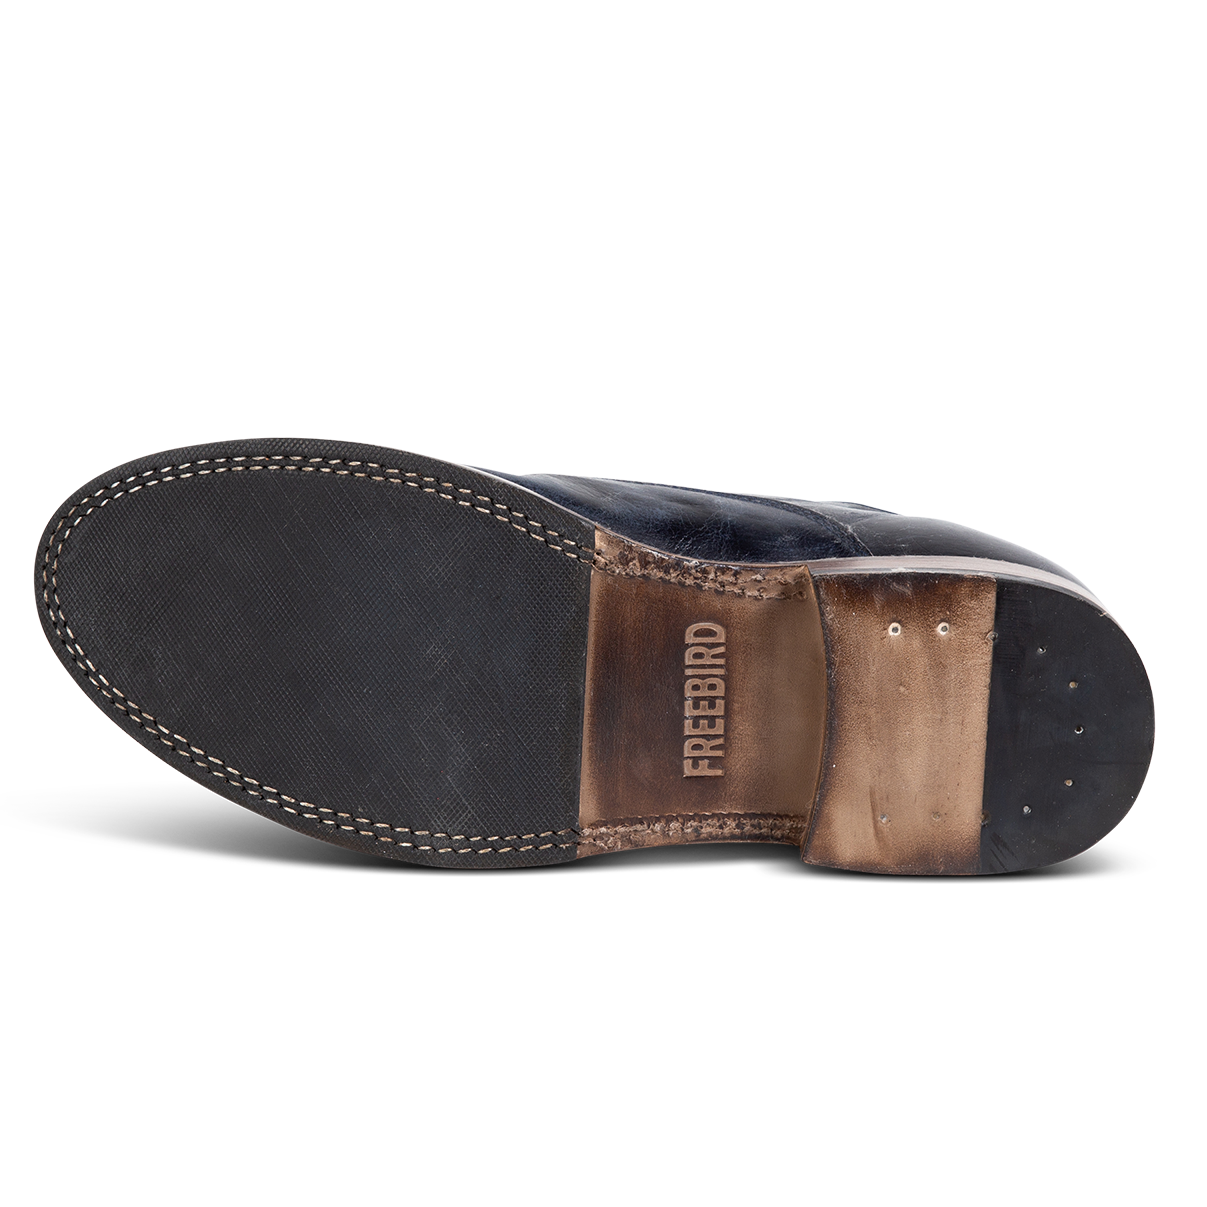 Rubber sole imprinted with FREEBIRD on men's Detrick navy shoe